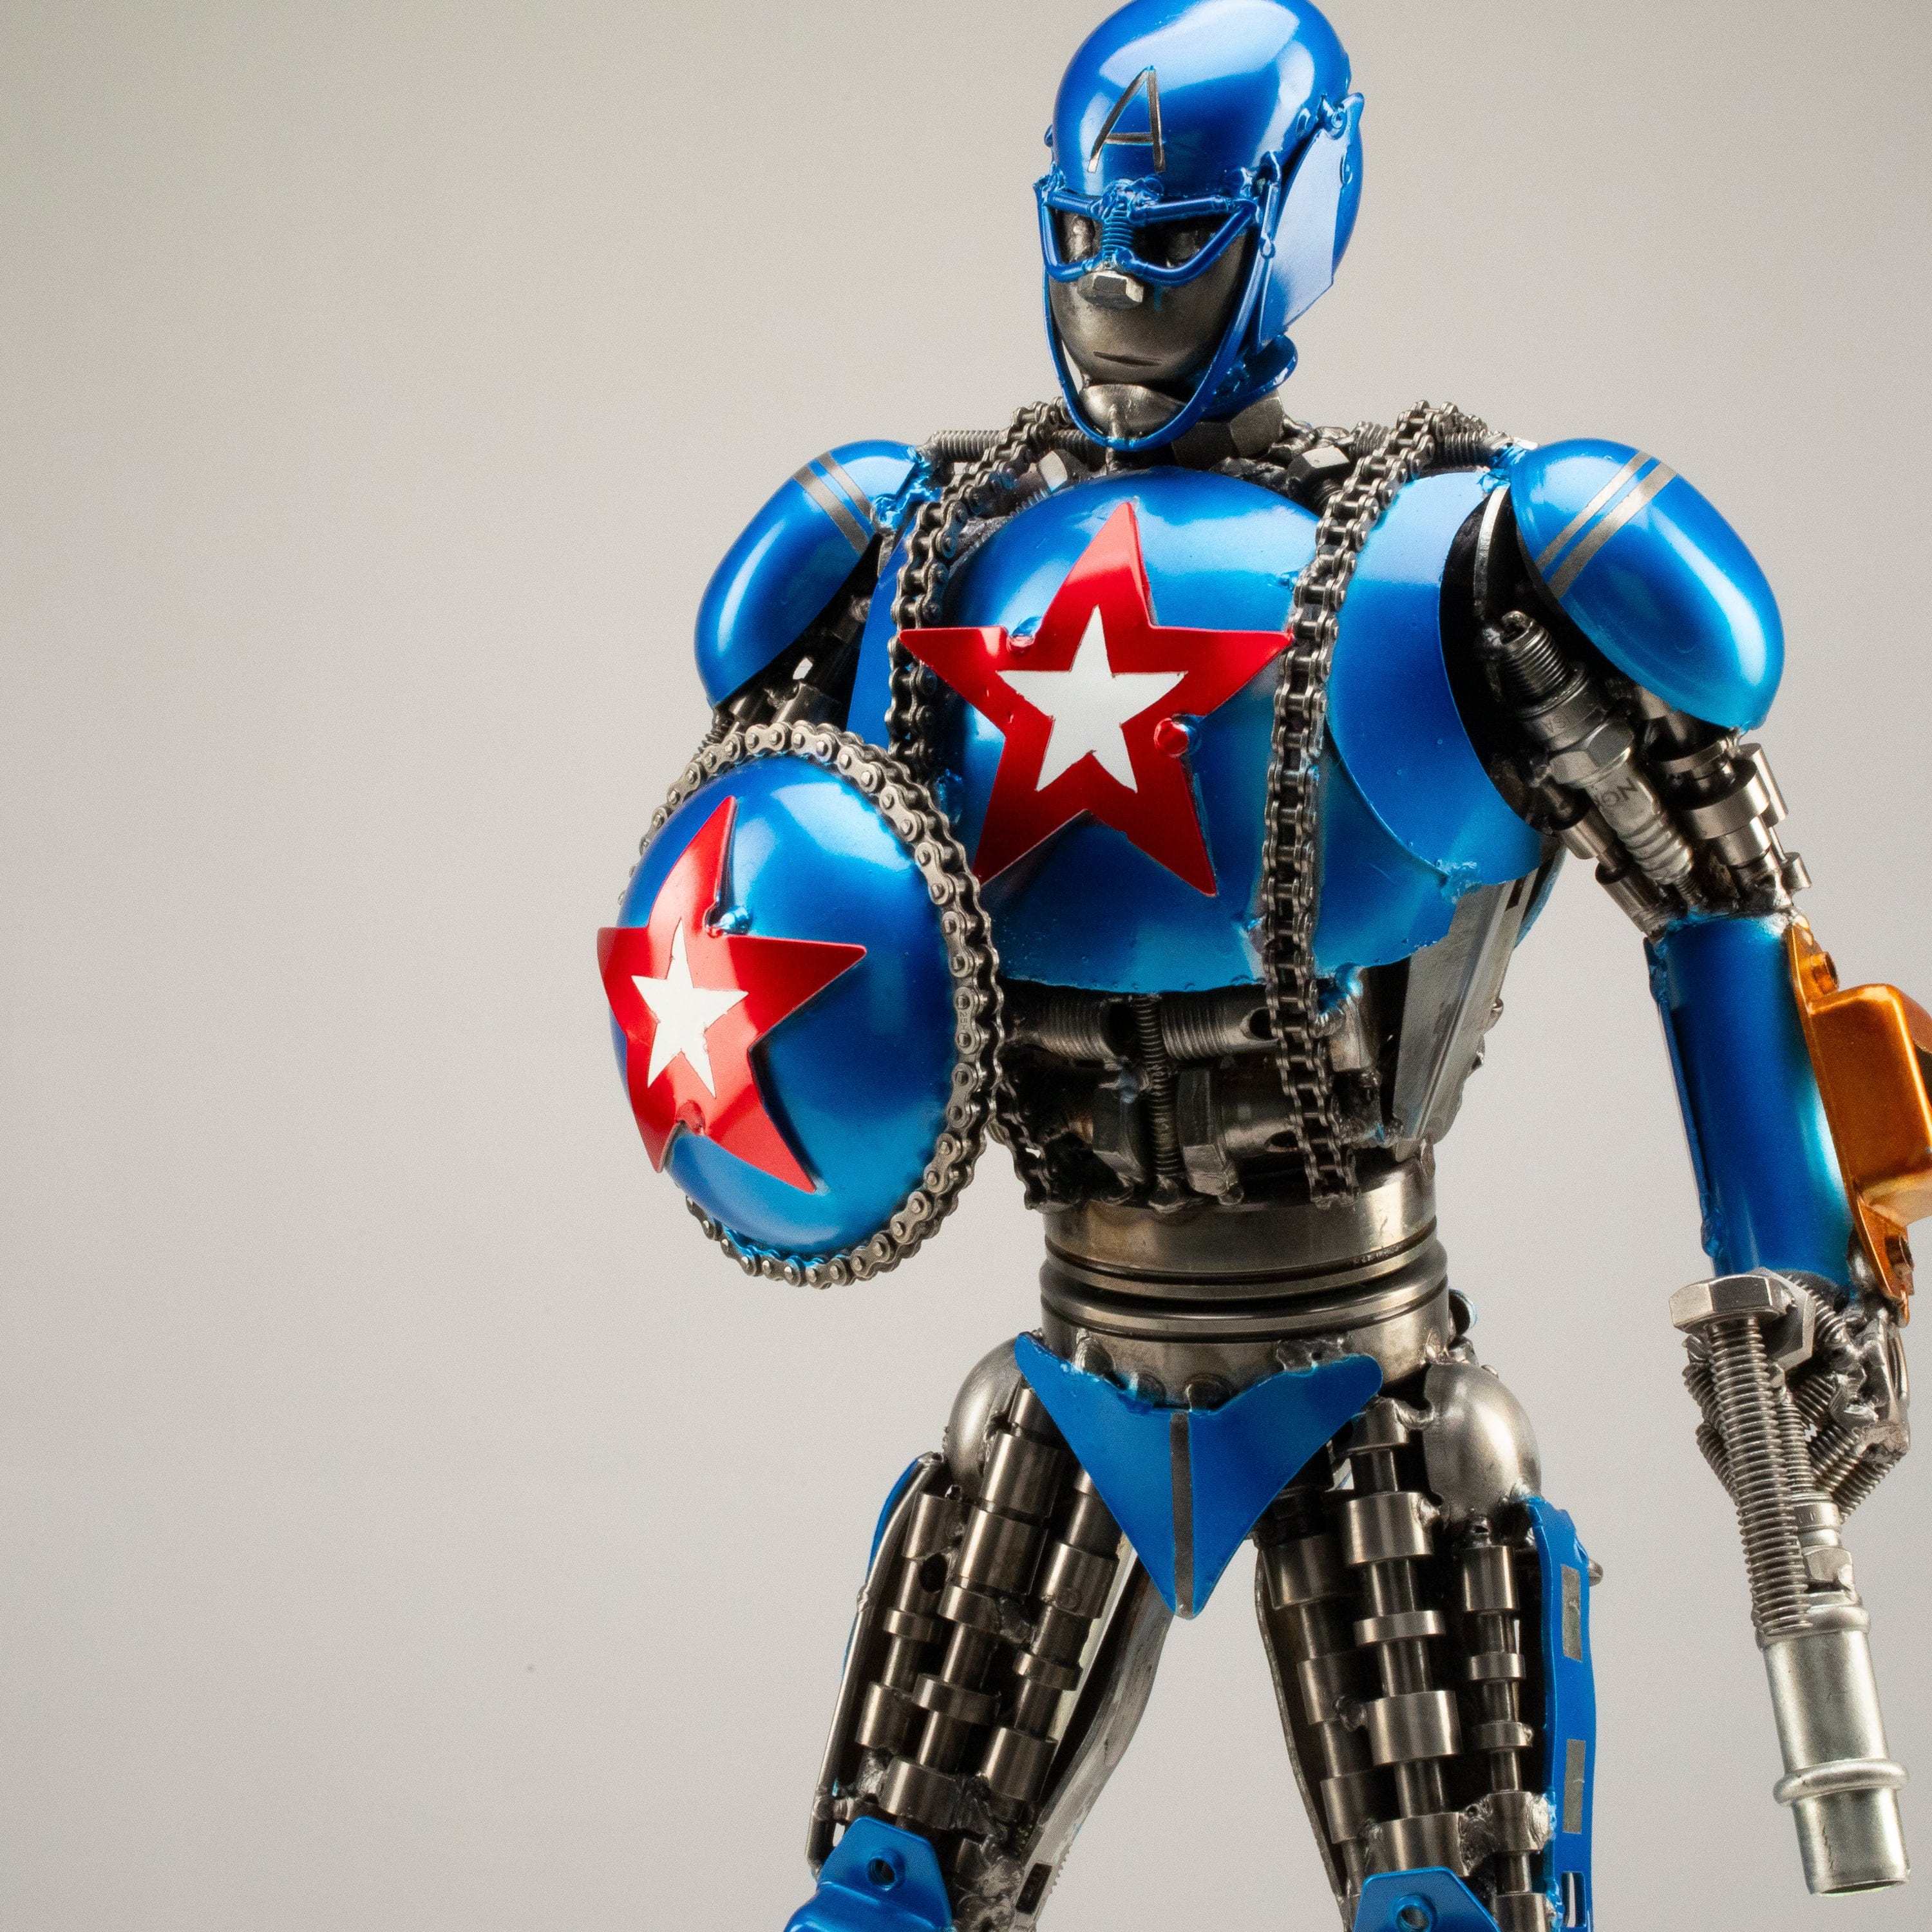 Kalifano Recycled Metal Art 22” Captain America Inspired Recycled Metal Sculpture RMS-CAP55-S